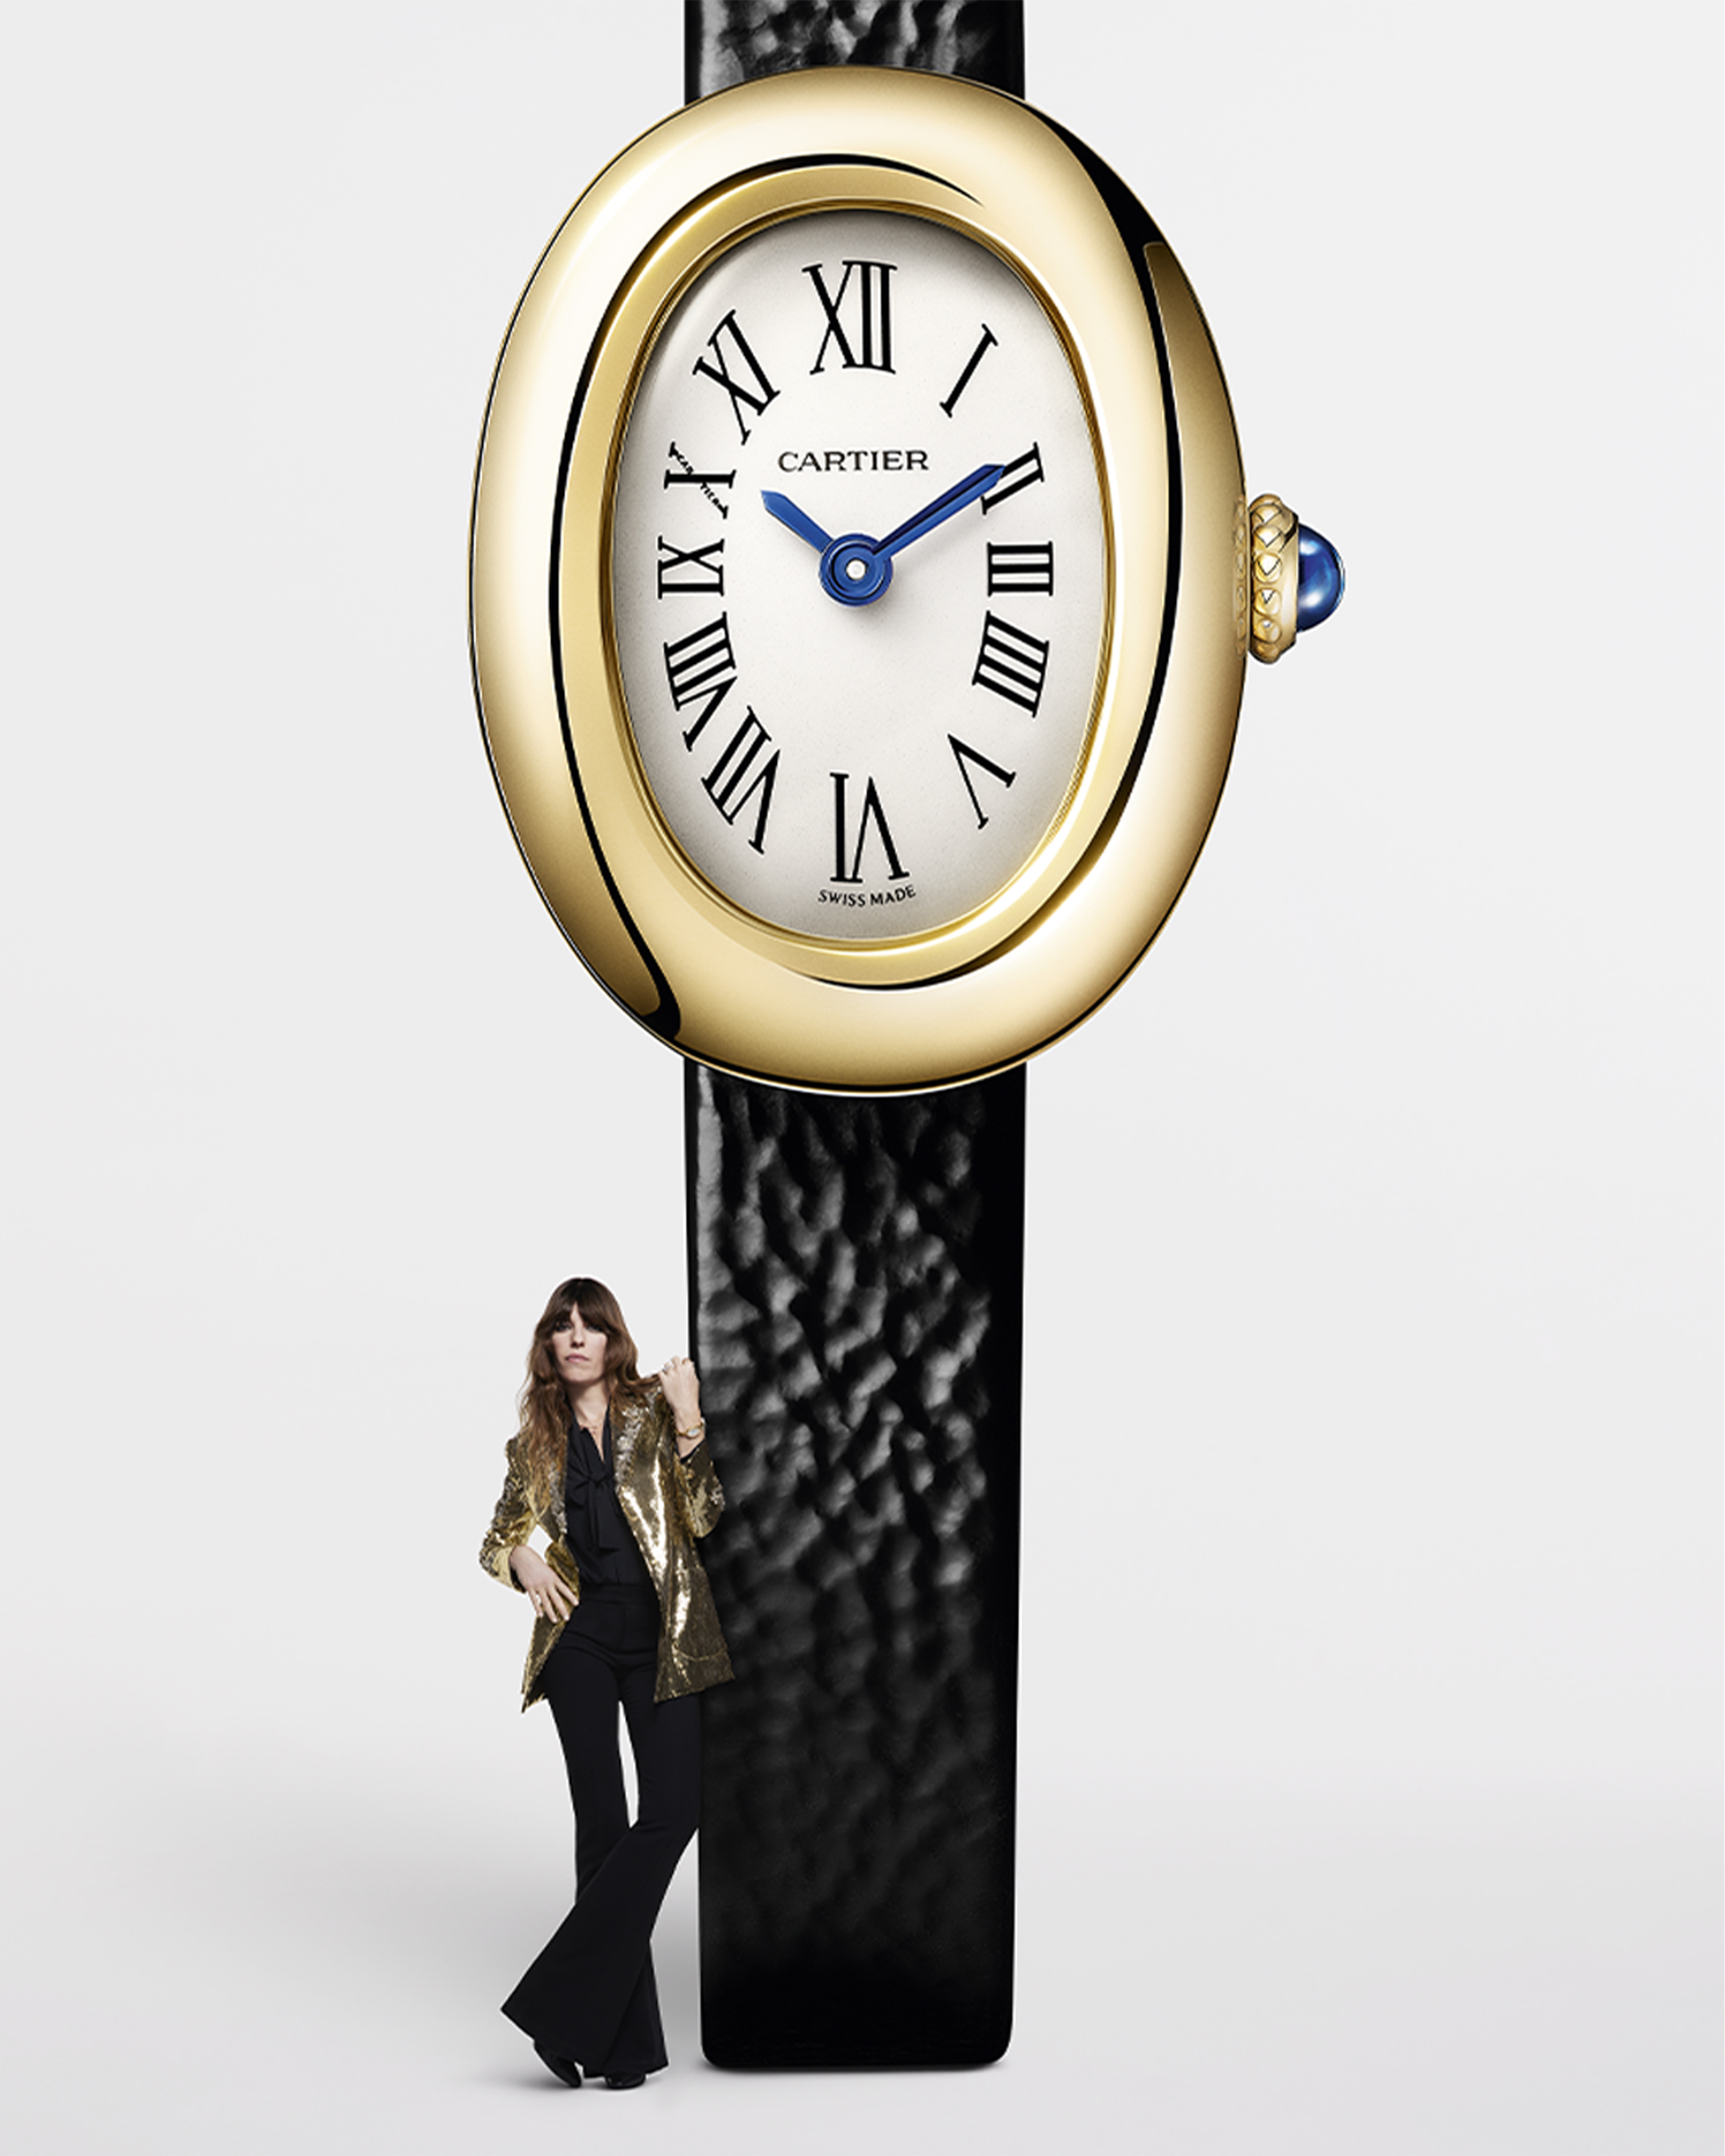 Image courtesy of Cartier